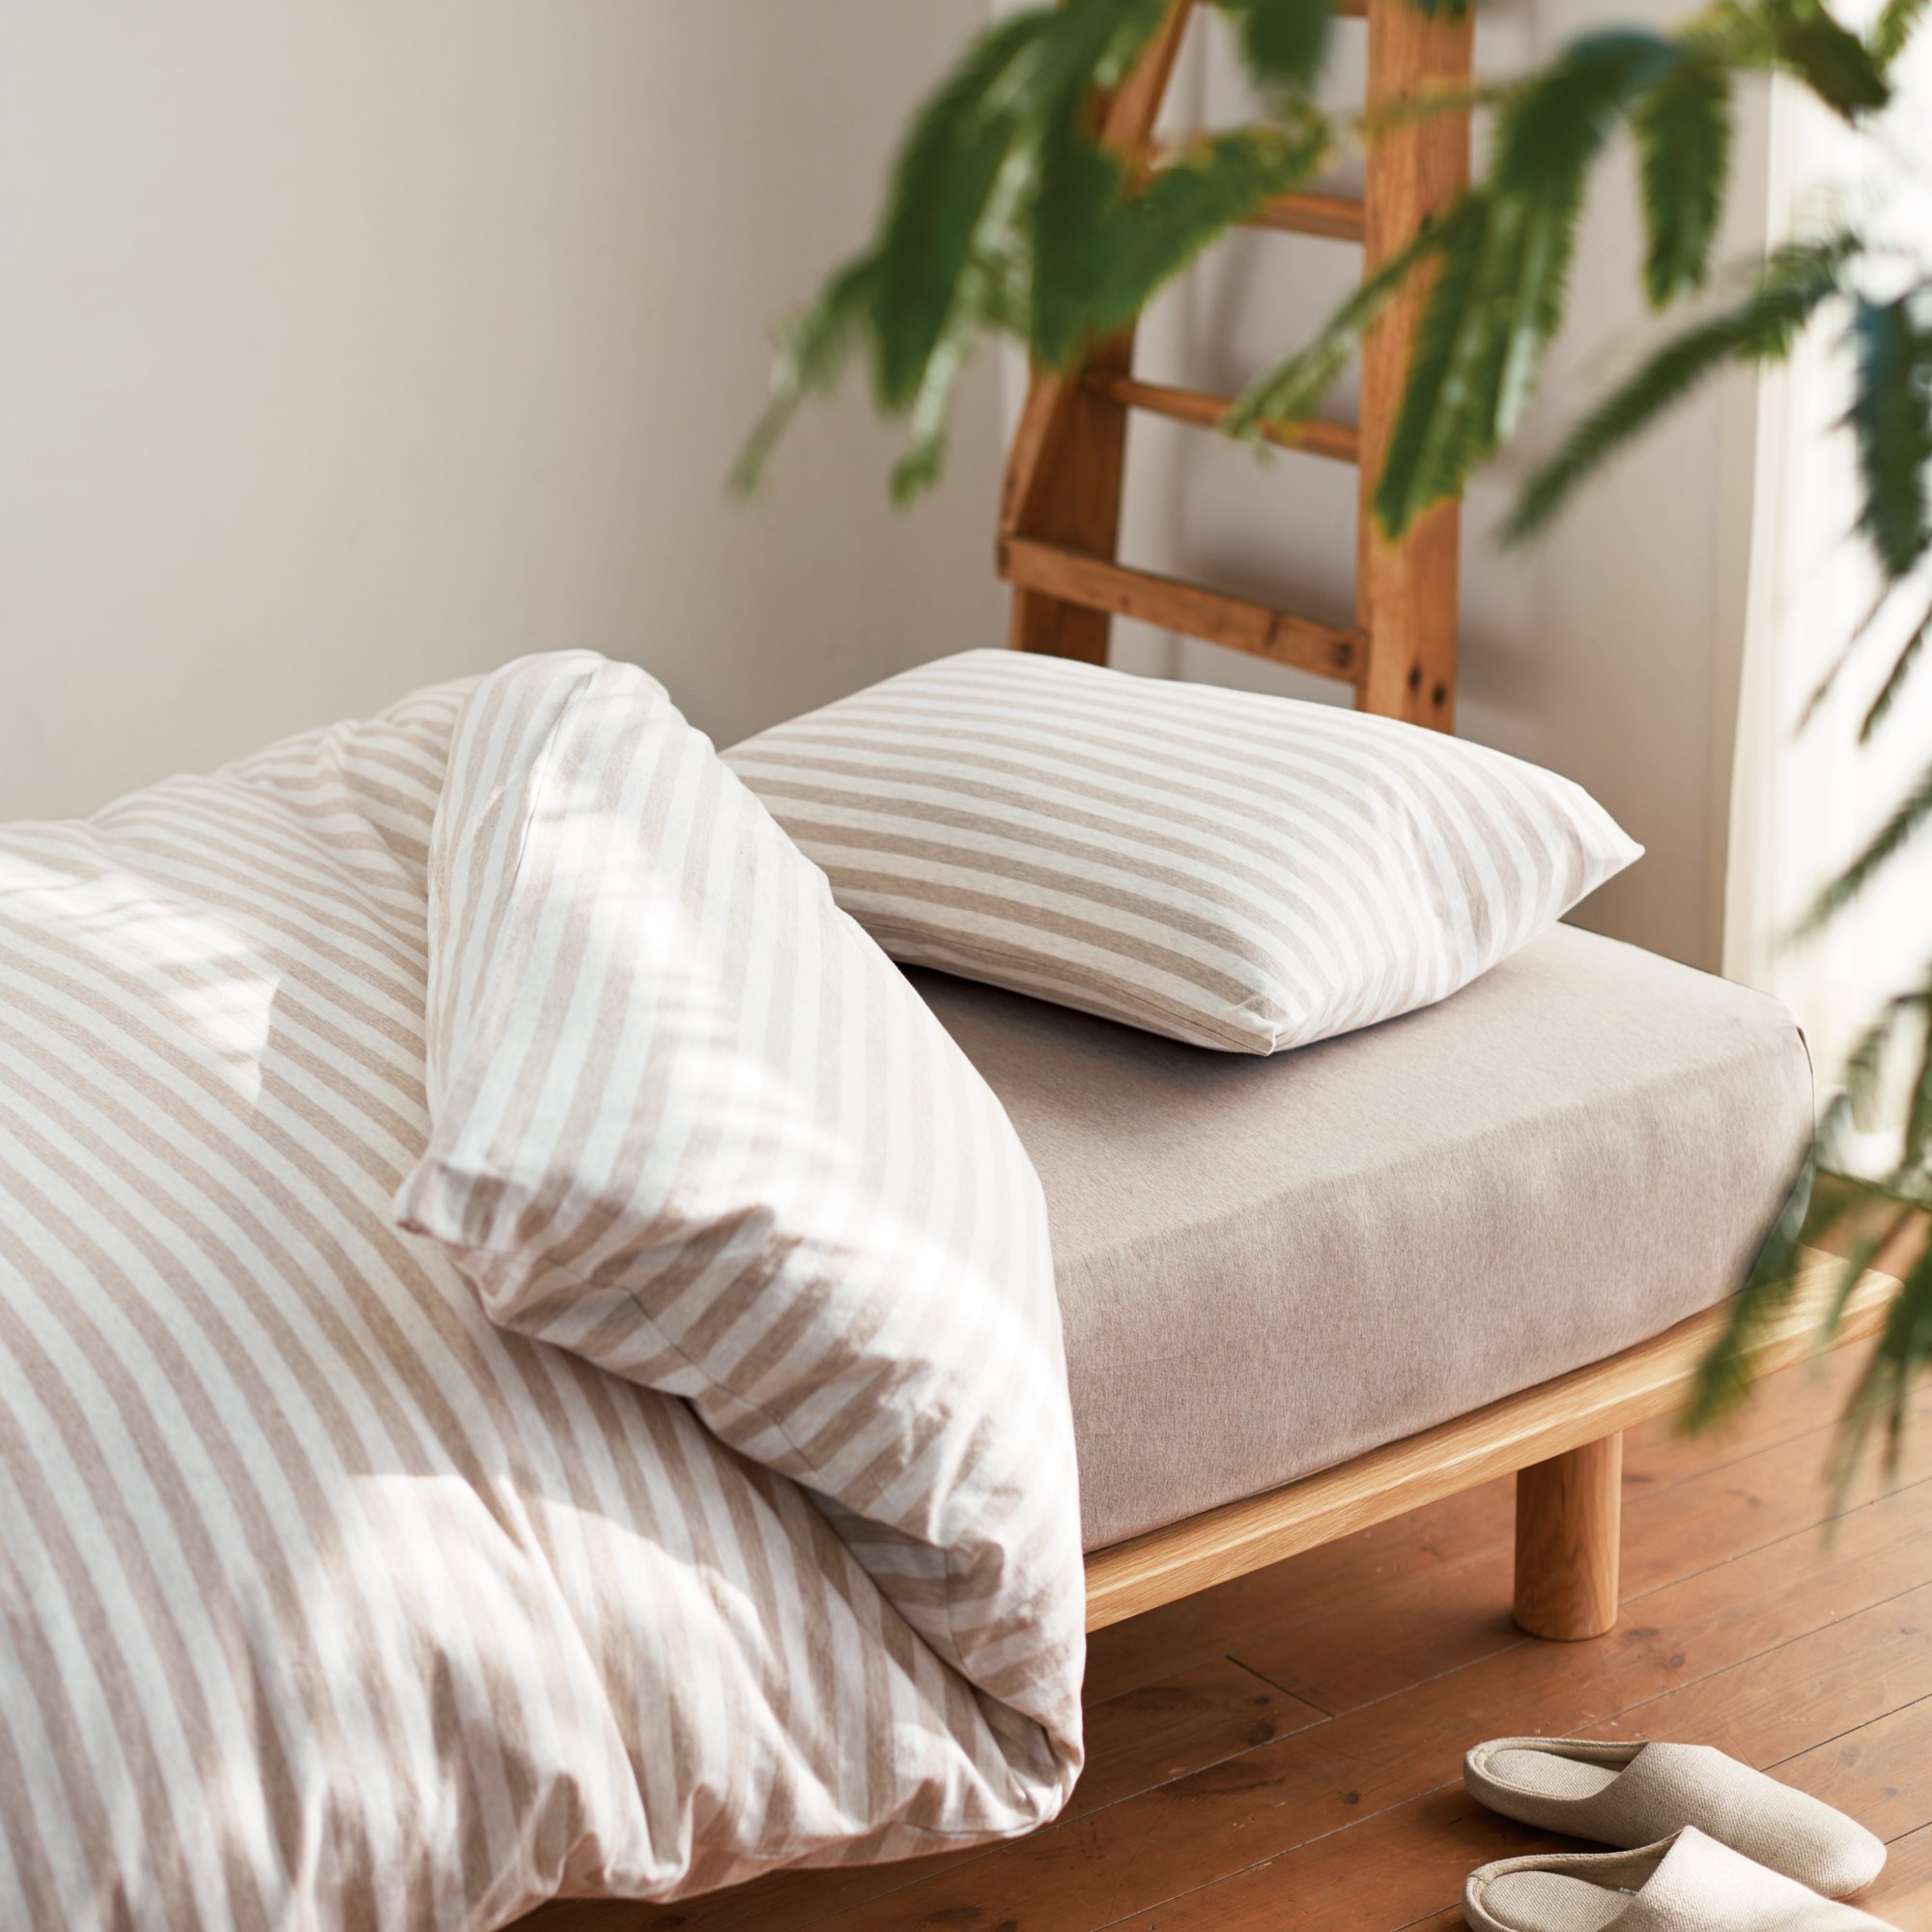 MUJI USA on Twitter: "Made organic cotton fabric, our Cotton Jersey bedding feels soft against the skin. Now 6/24, buy one Cotton bedding item, get one free in stores! *